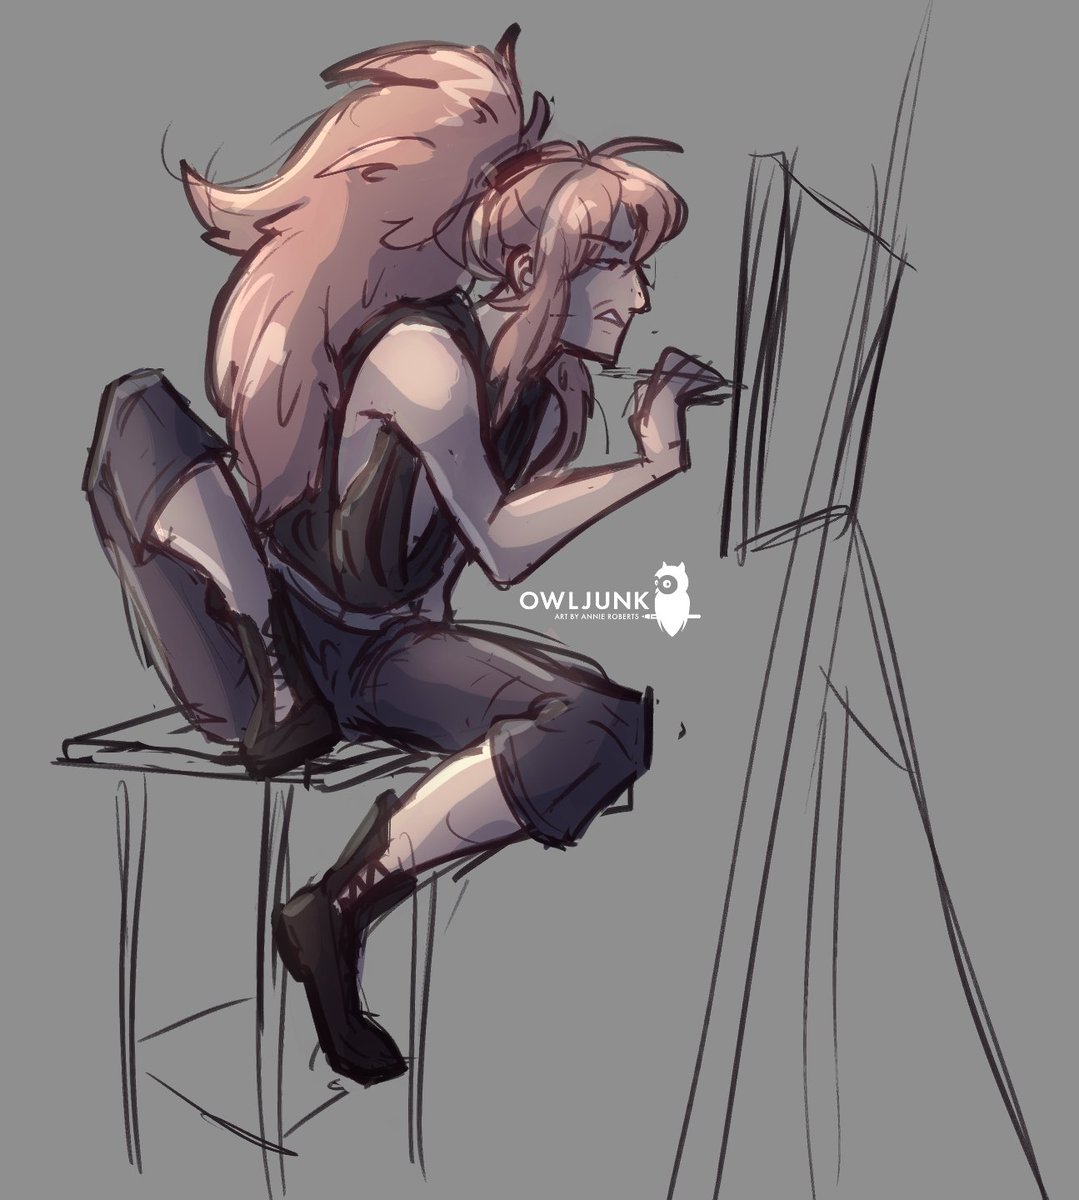 artemis got the adhd wiggles while he's painting why he sitting like that

#sketch #ffxiv #azem #characterdesign